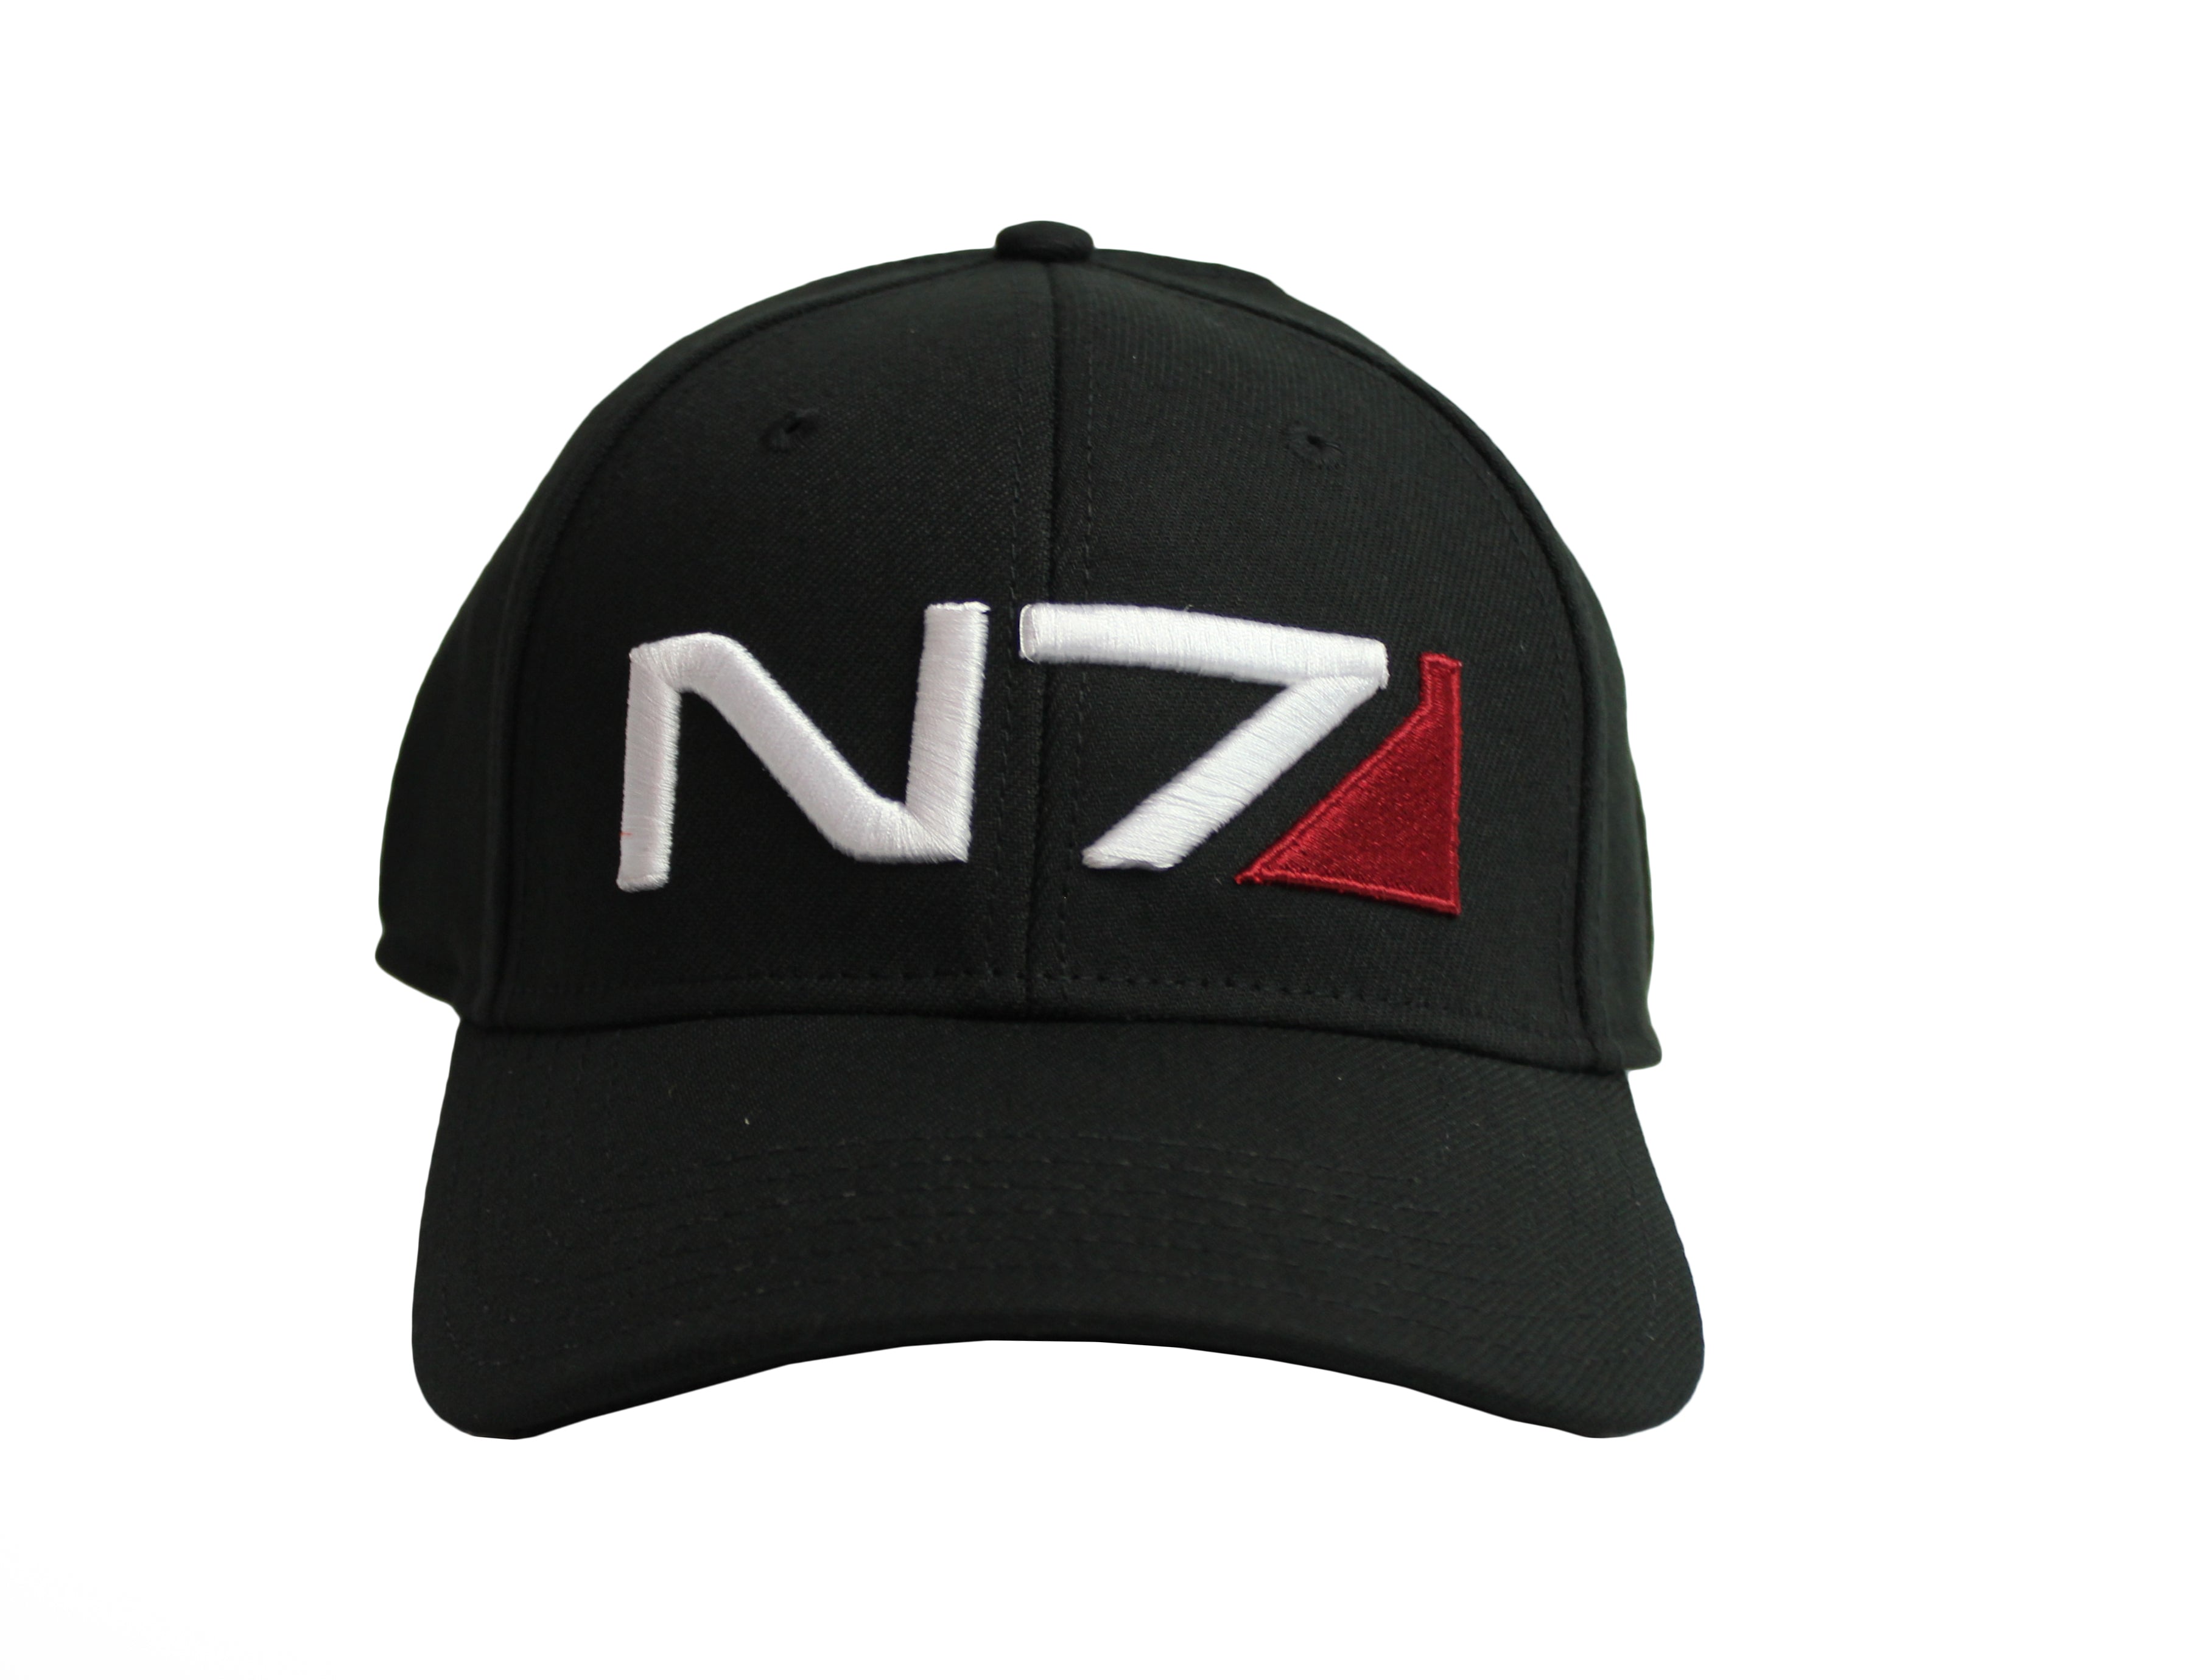 Mass Effect N7 Black Fitted Hat Cap One Size Fits Most